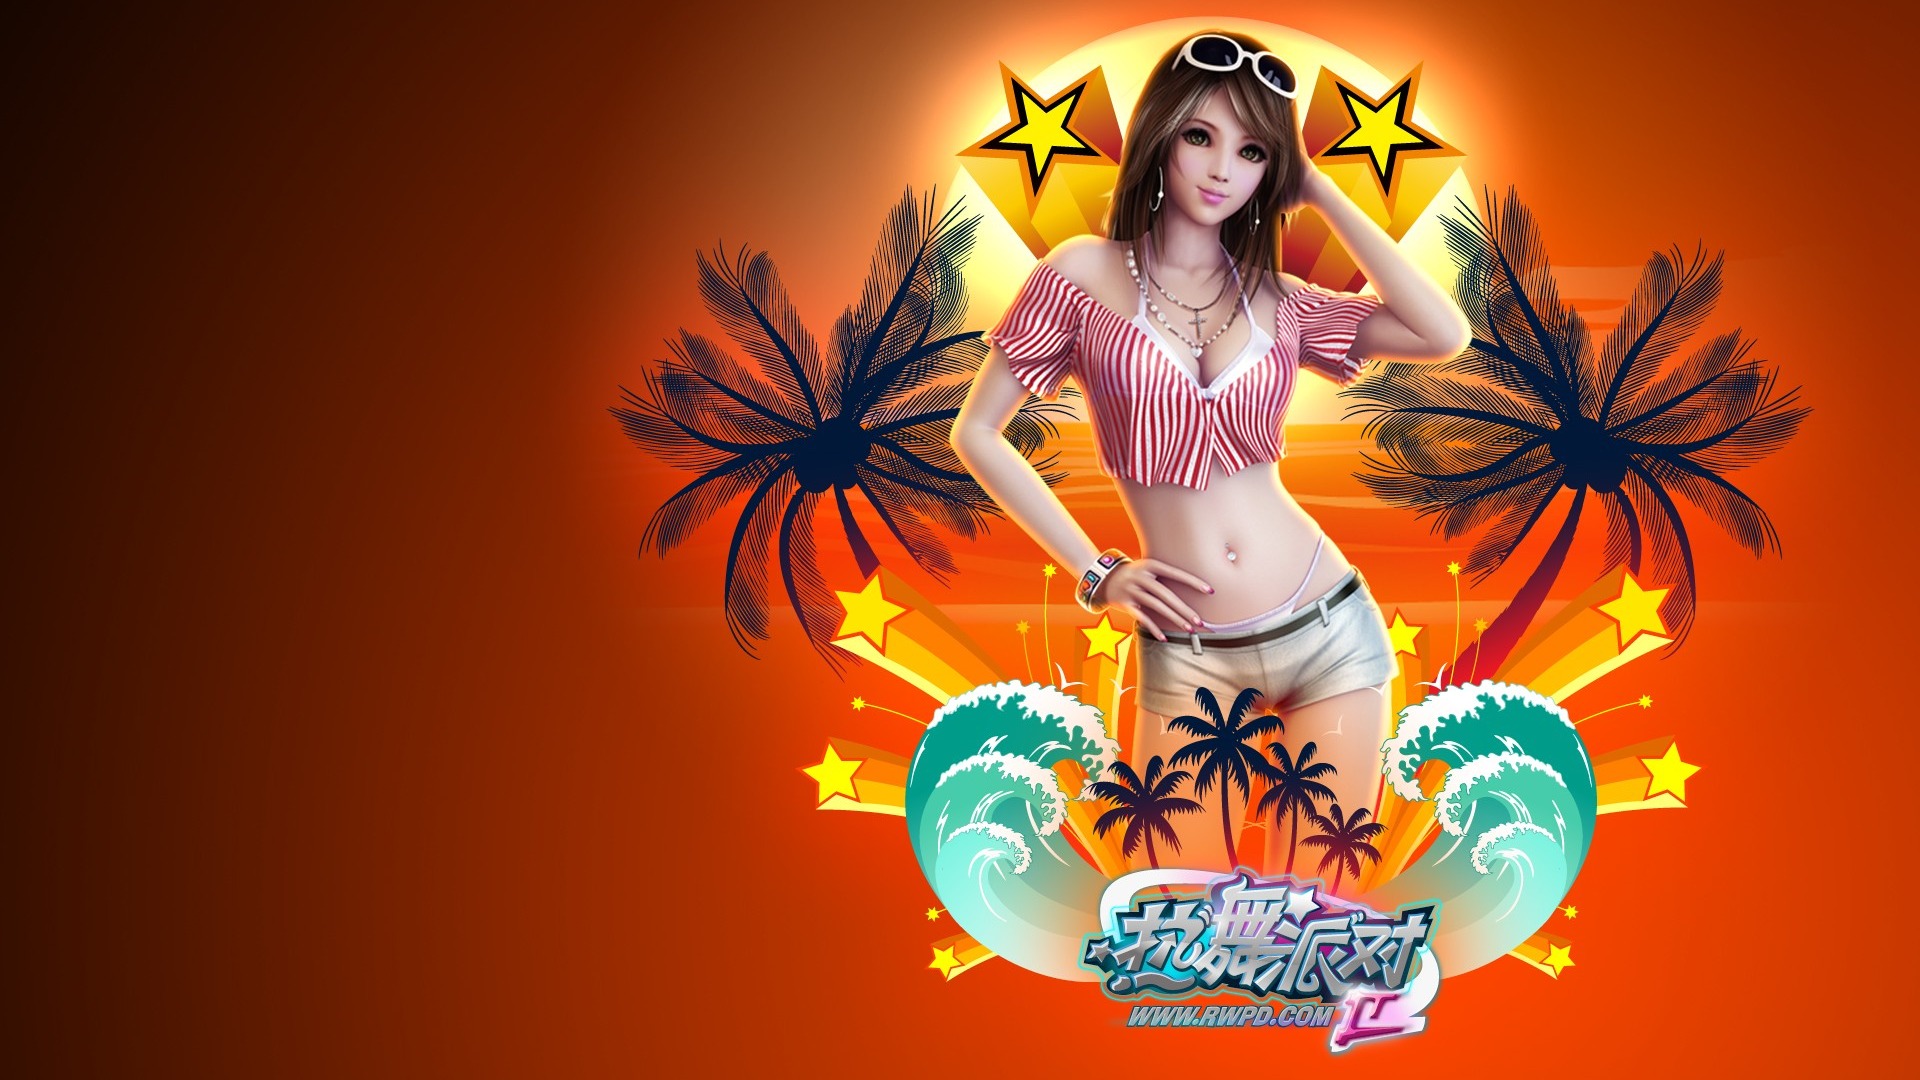 Online game Hot Dance Party II official wallpapers #3 - 1920x1080